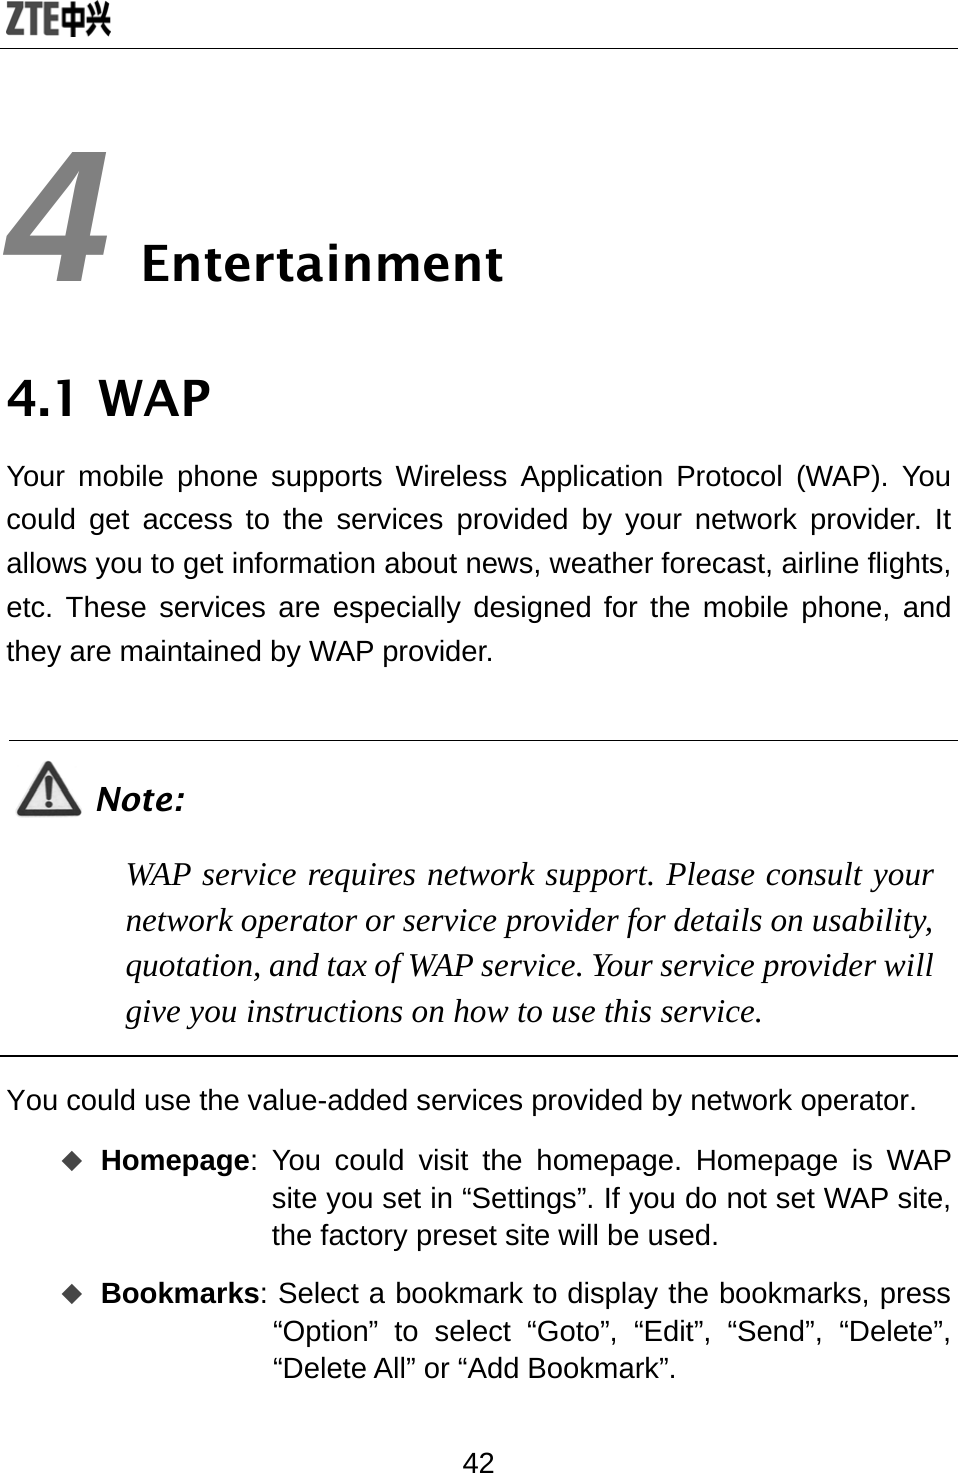  42 4 Entertainment 4.1 WAP Your mobile phone supports Wireless Application Protocol (WAP). You could get access to the services provided by your network provider. It allows you to get information about news, weather forecast, airline flights, etc. These services are especially designed for the mobile phone, and they are maintained by WAP provider.  Note: WAP service requires network support. Please consult your network operator or service provider for details on usability, quotation, and tax of WAP service. Your service provider will give you instructions on how to use this service.  You could use the value-added services provided by network operator.    Homepage: You could visit the homepage. Homepage is WAP site you set in “Settings”. If you do not set WAP site, the factory preset site will be used.  Bookmarks: Select a bookmark to display the bookmarks, press “Option” to select “Goto”, “Edit”, “Send”, “Delete”, “Delete All” or “Add Bookmark”. 